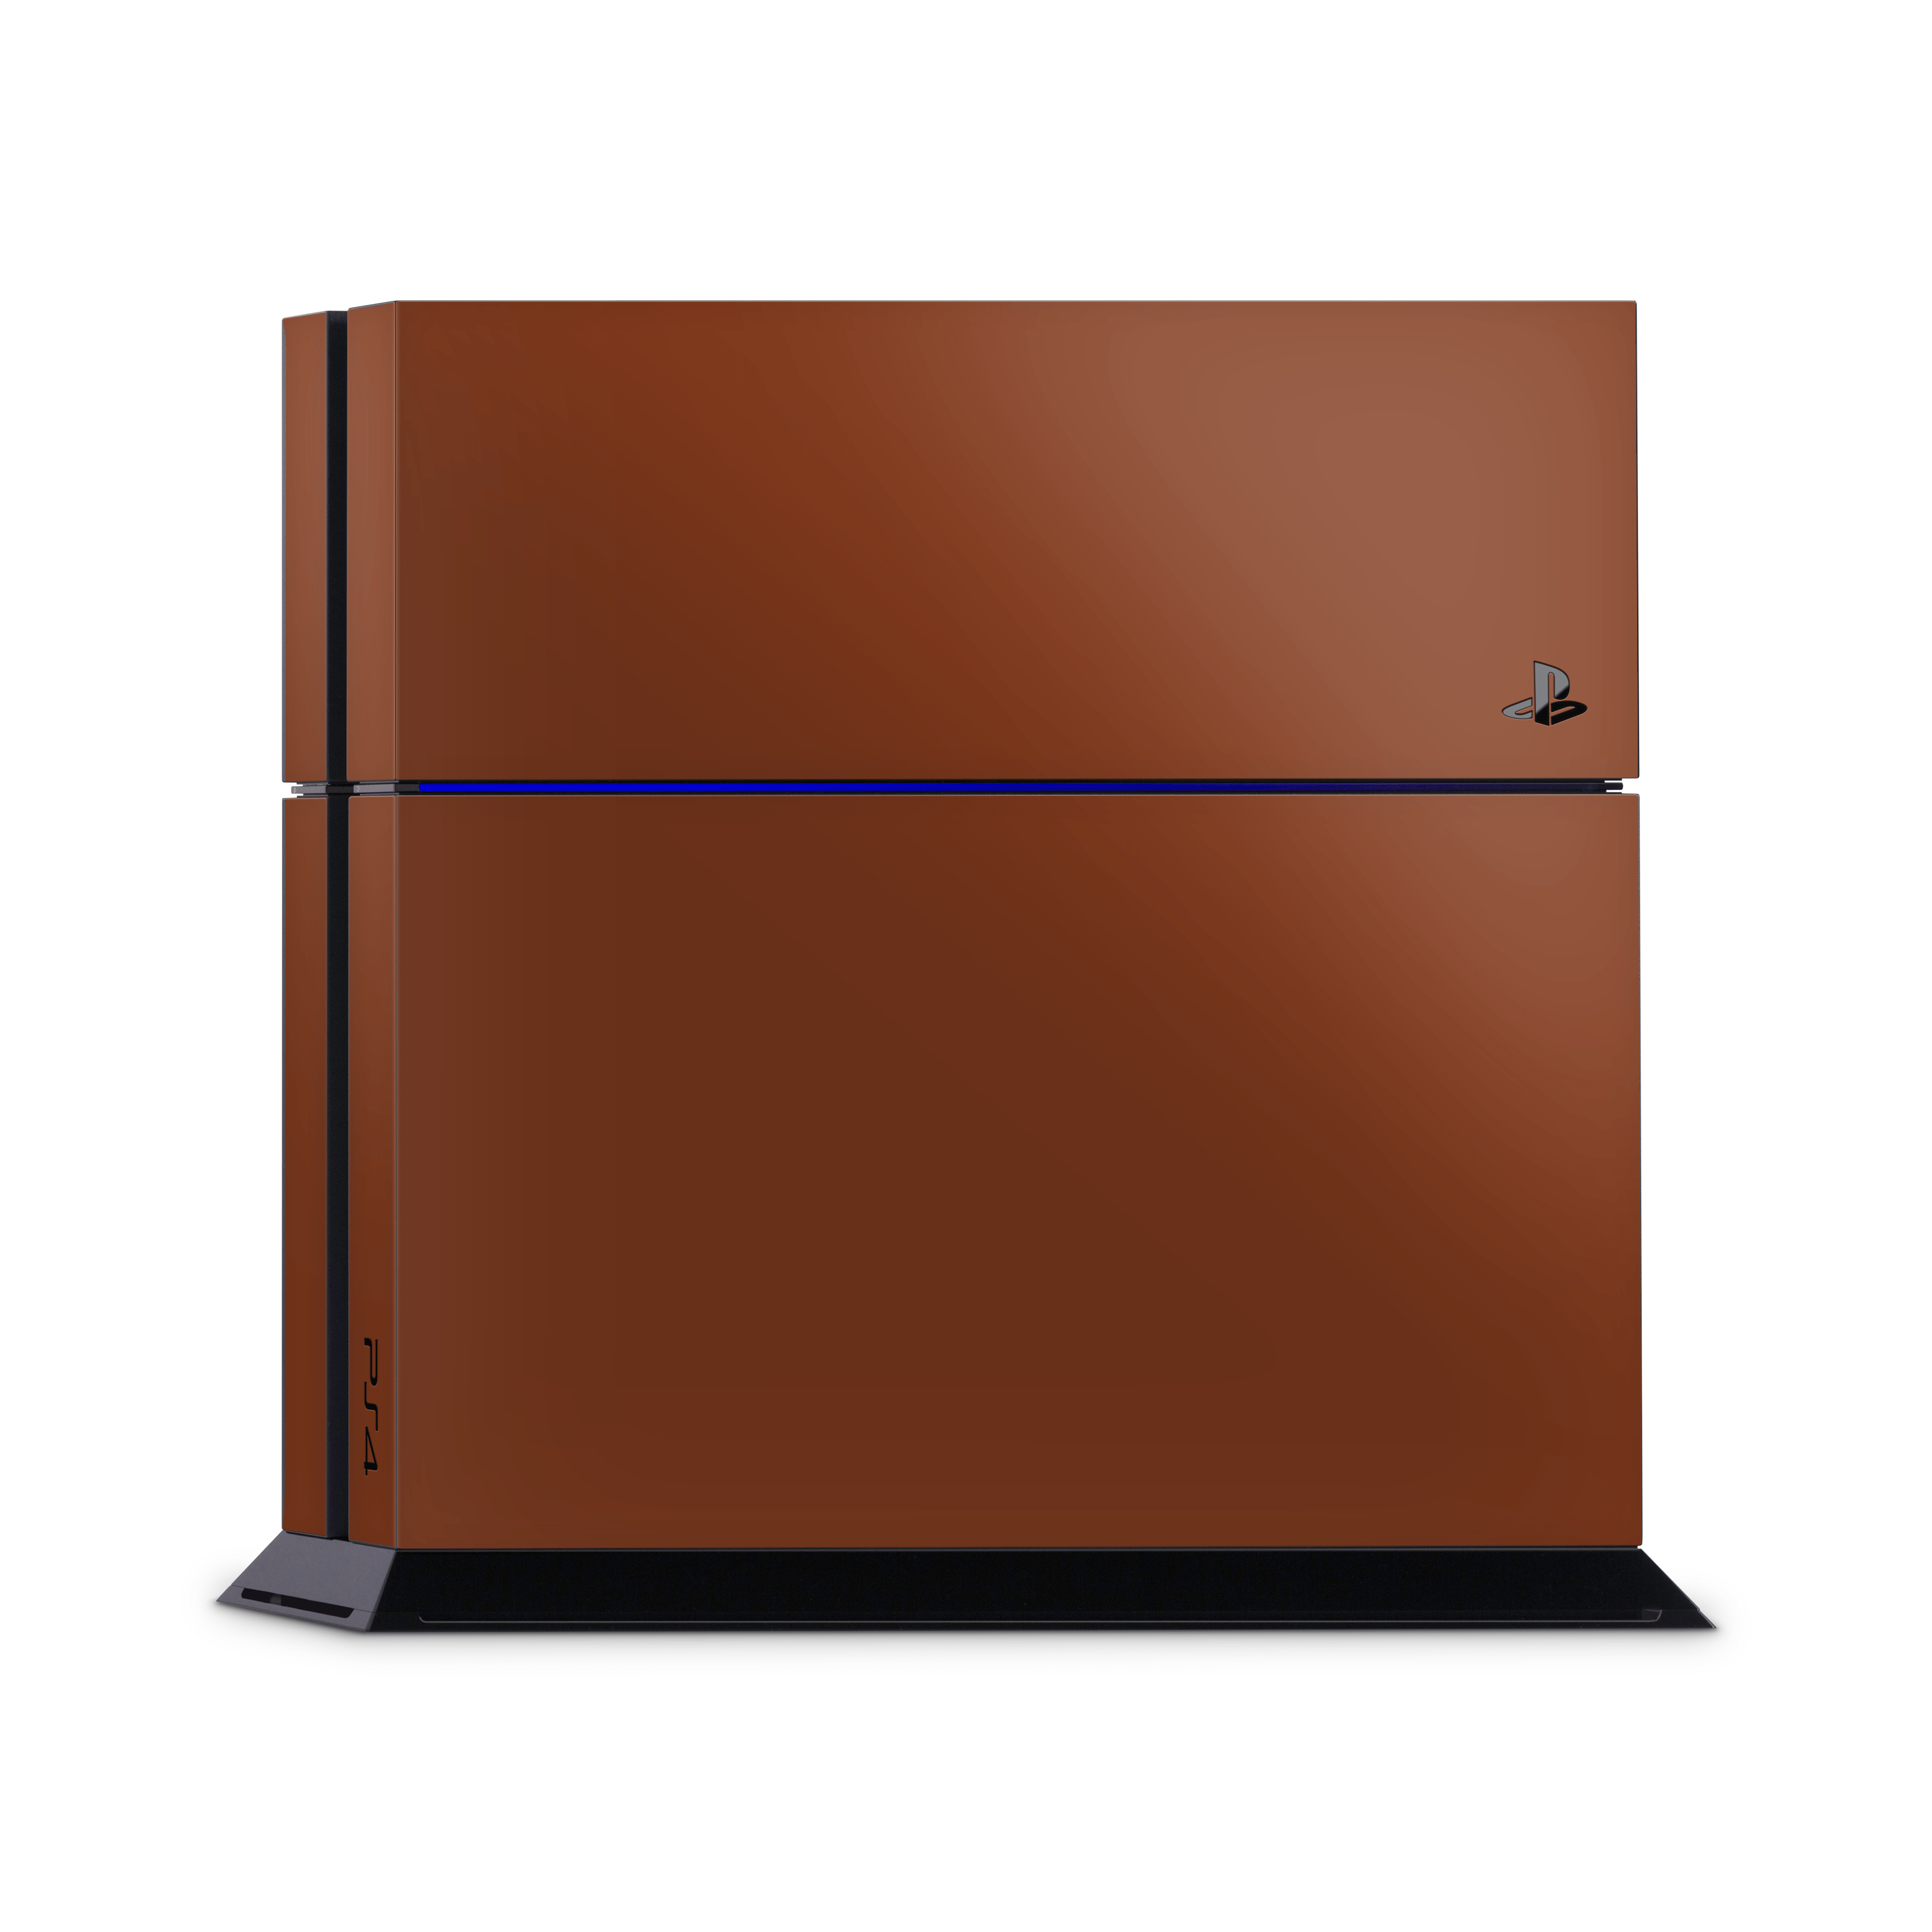 Gingerbread Cookie PS4 | PS4 Pro | PS4 Slim Skins